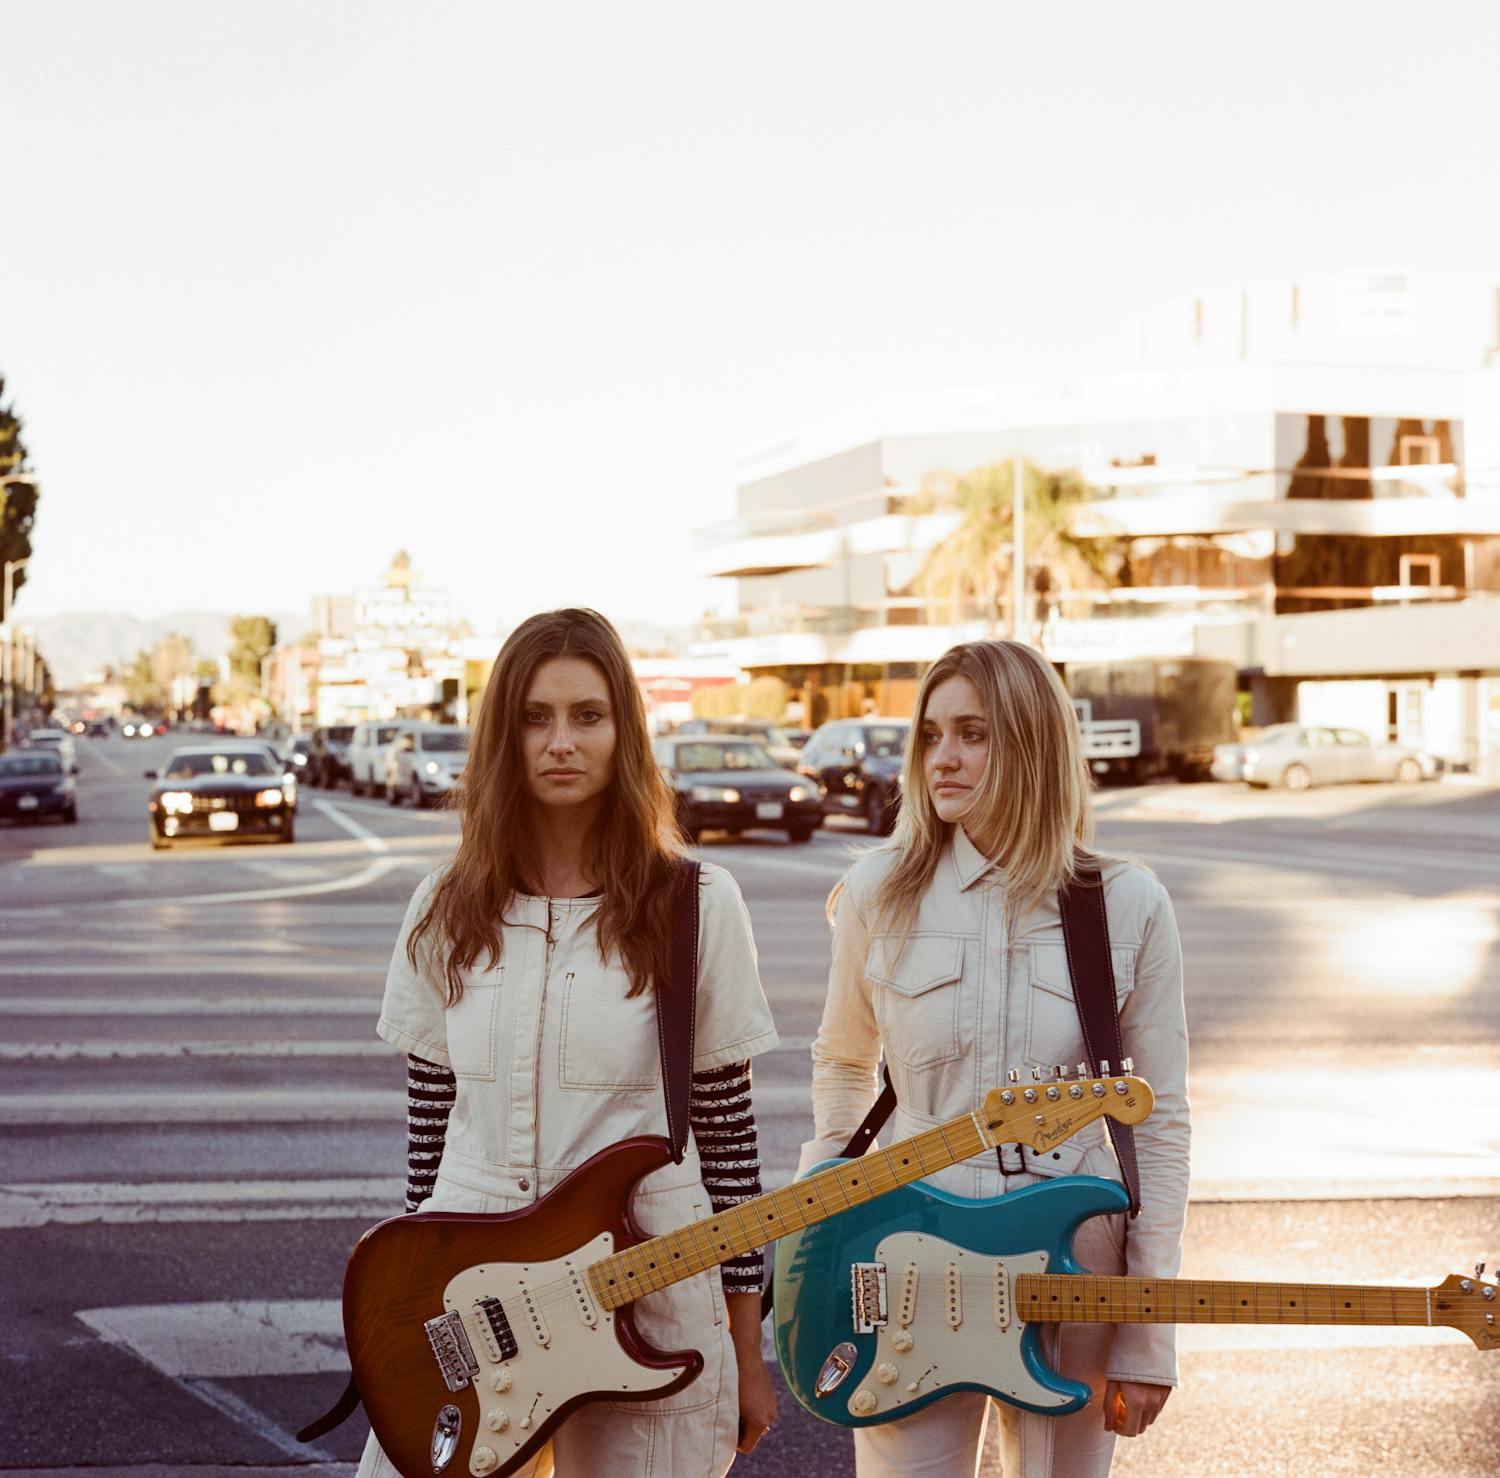 &quot;Listen!!!&quot; will be featured on Aly &amp; AJ&#x27;s upcoming album, to be released in spring.